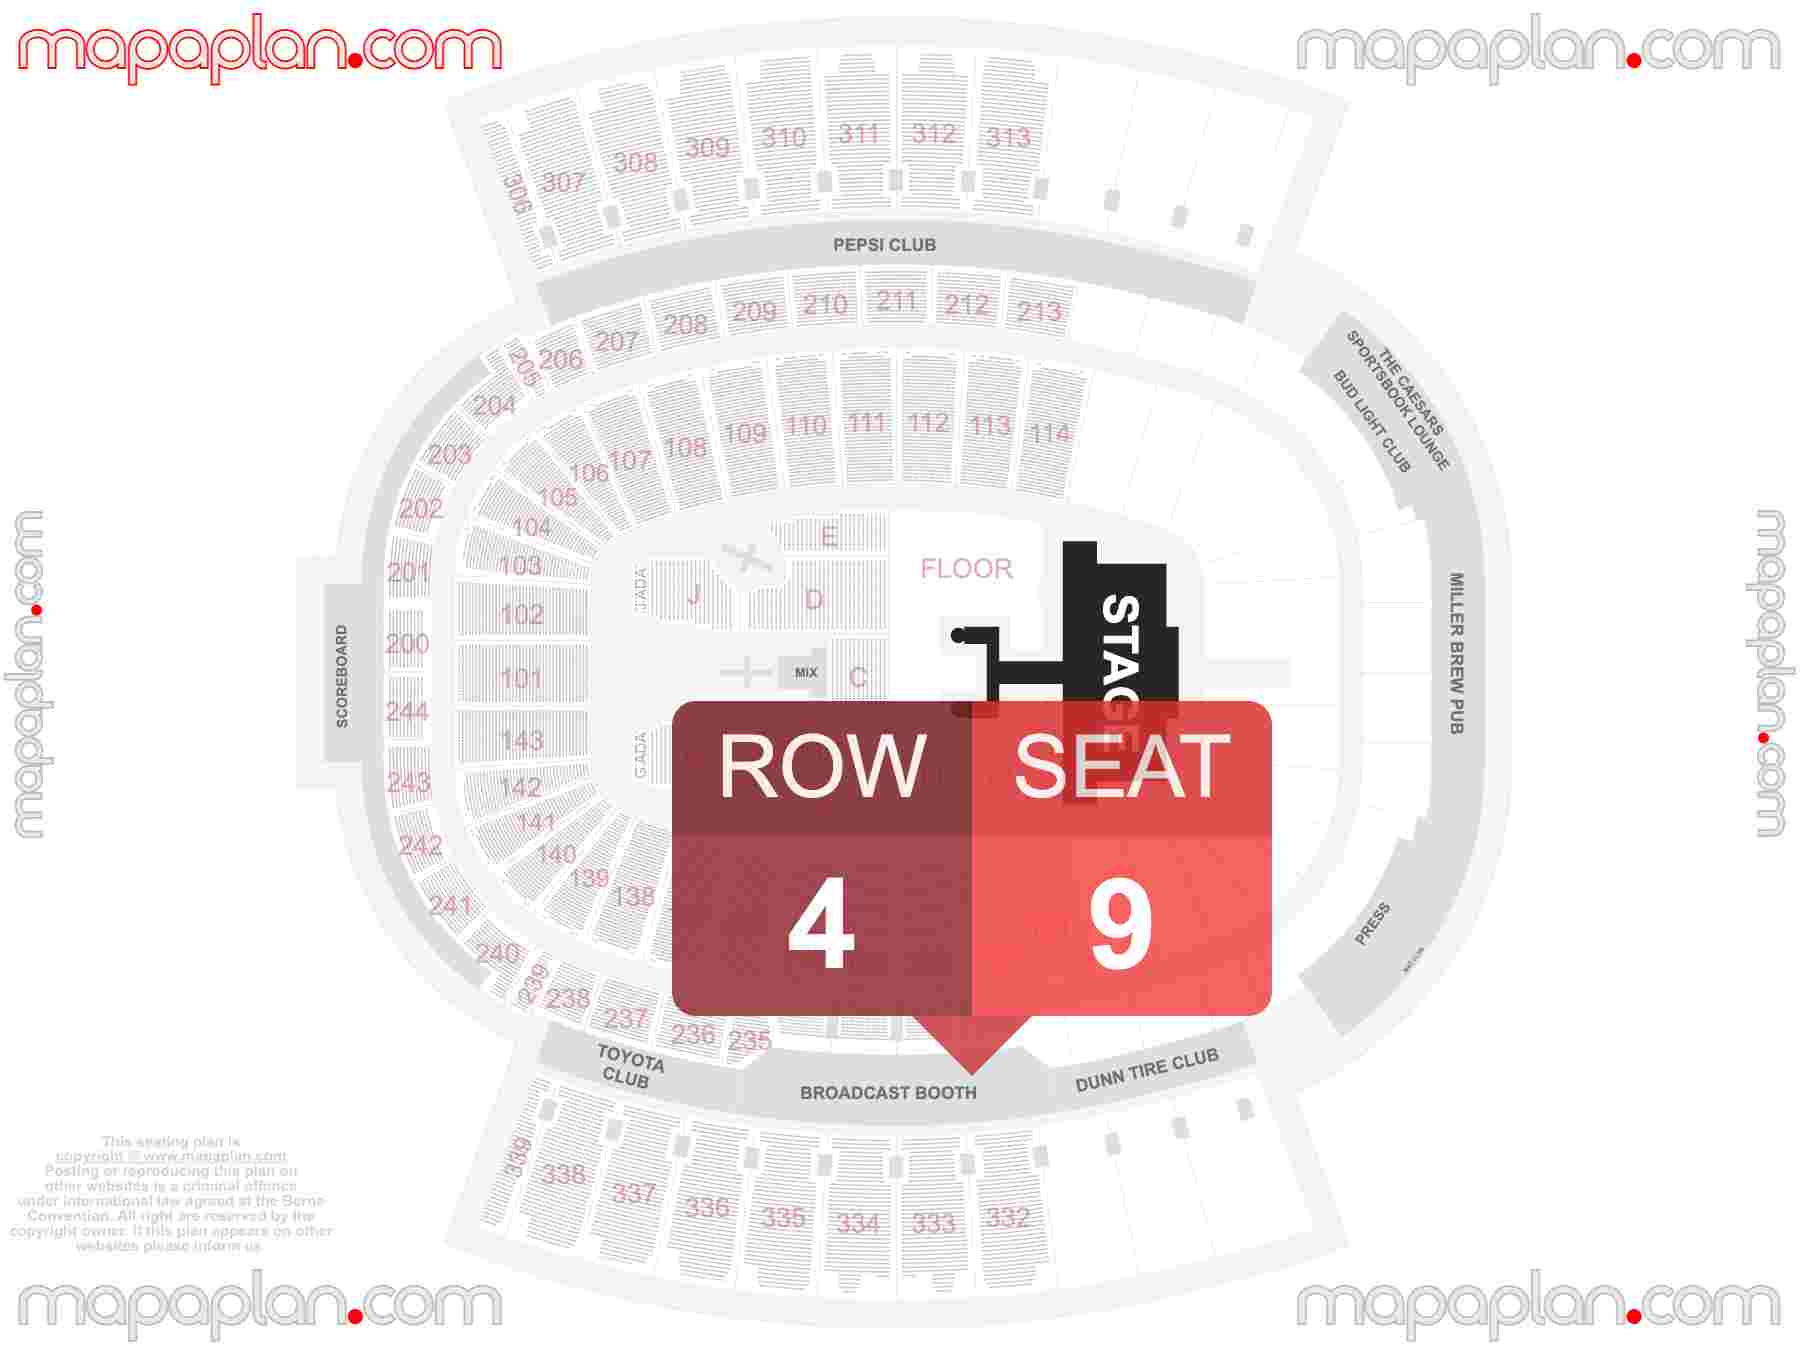 Orchard Park Highmark Stadium seating chart Concert detailed seat numbers and row numbering chart with interactive map plan layout